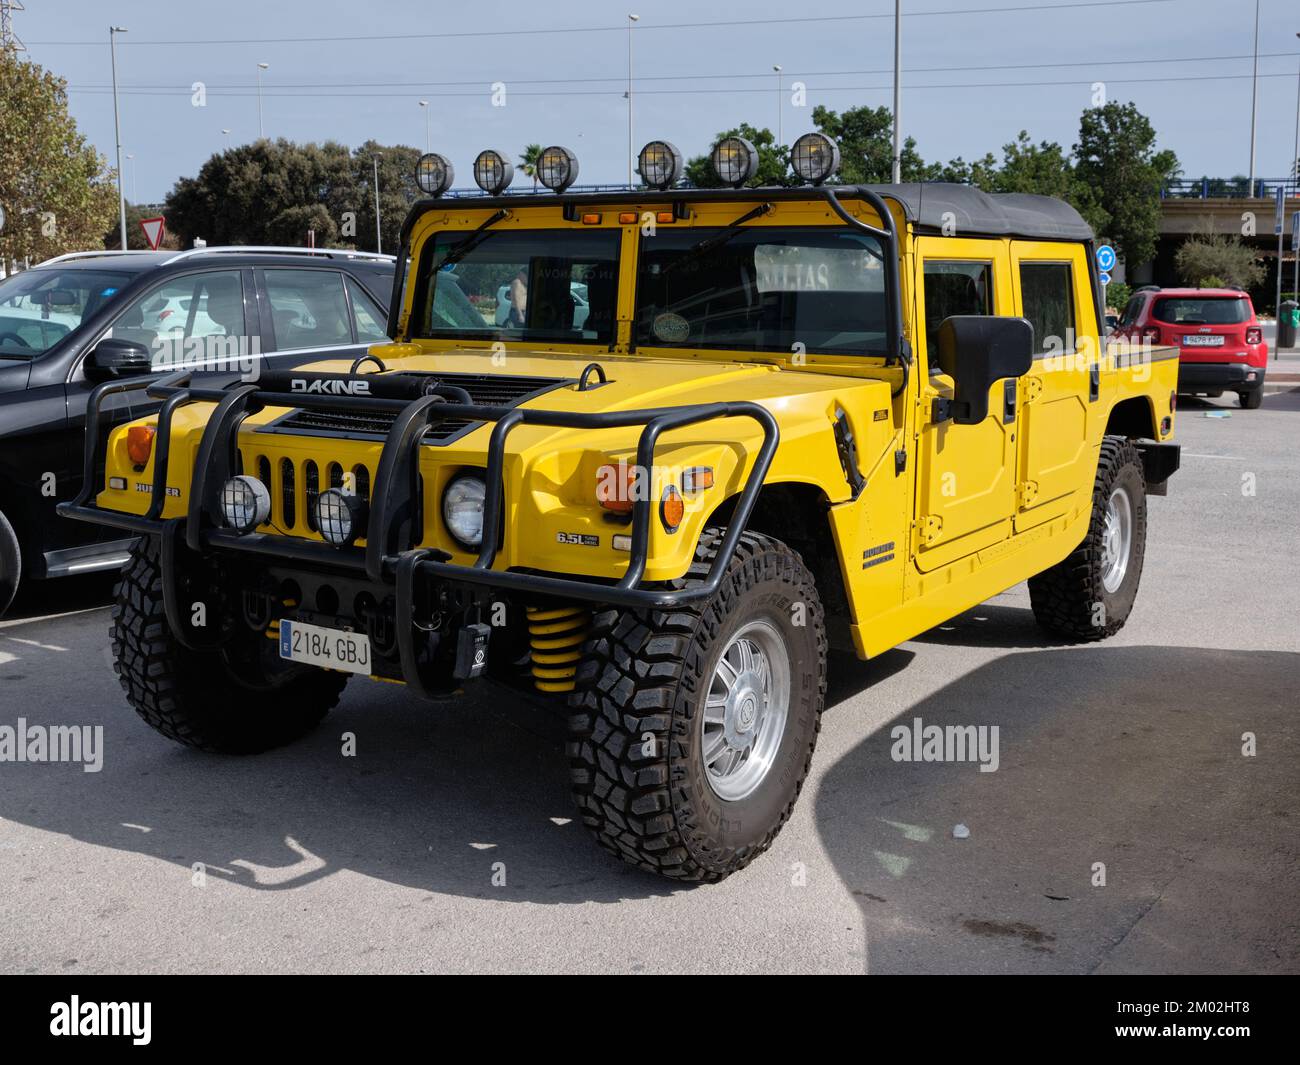 Hummer H1 Photos and Images